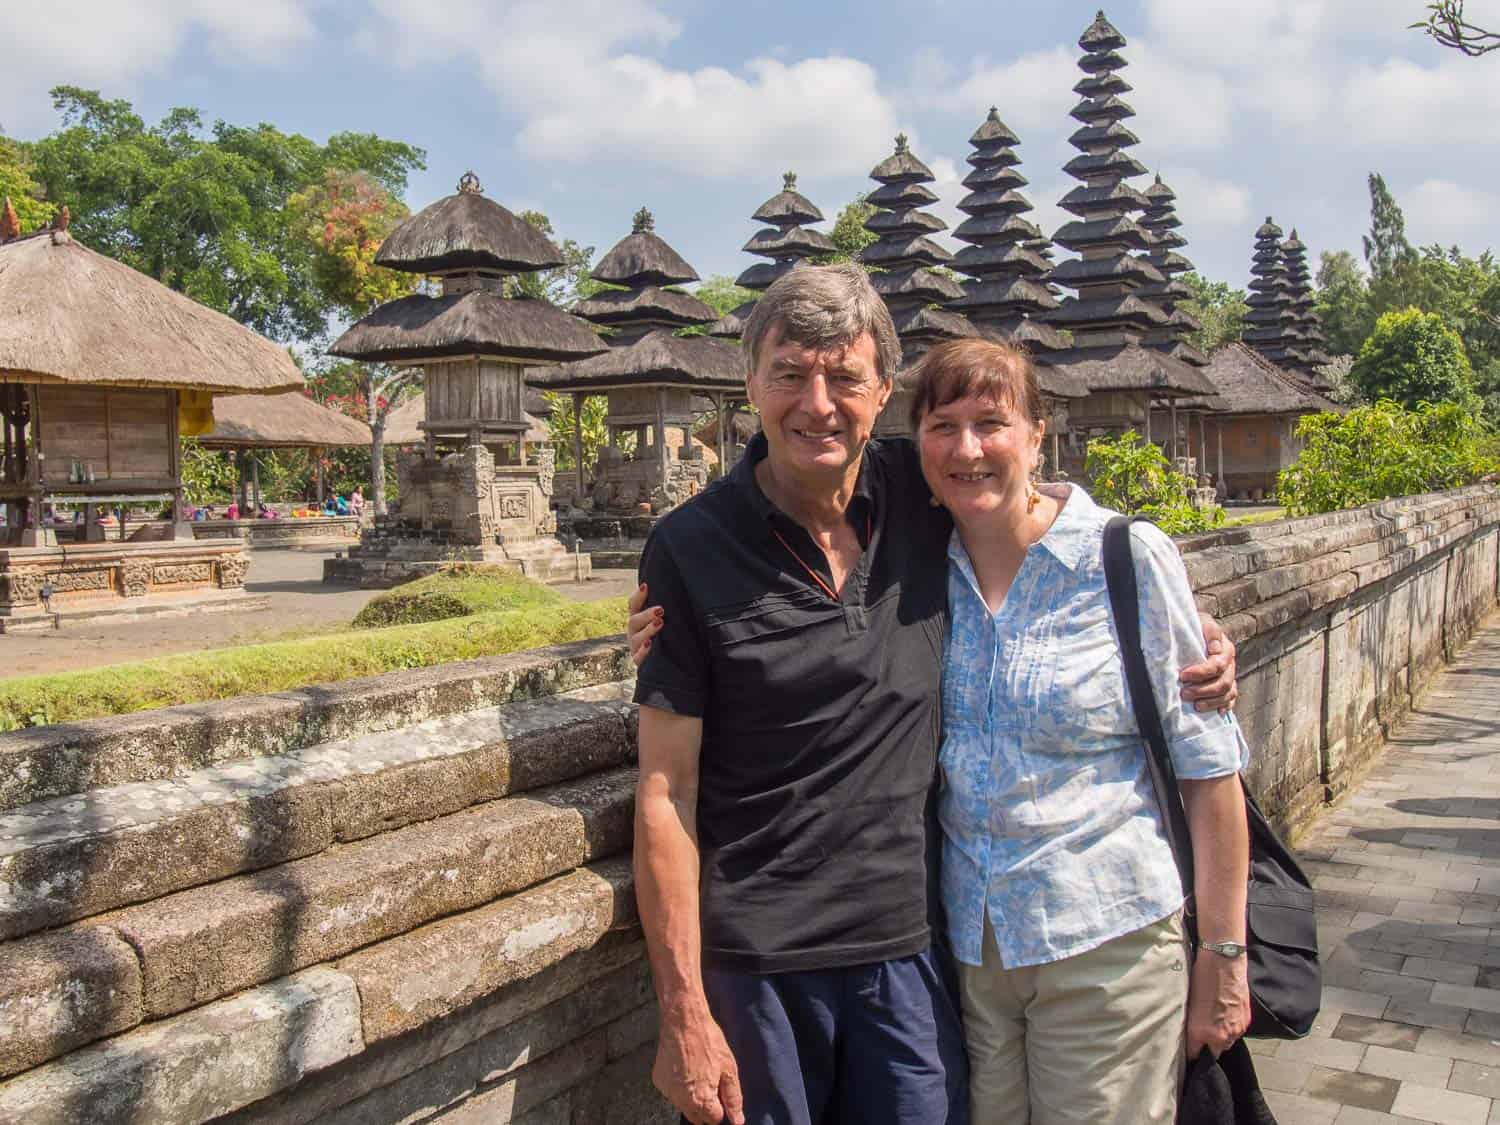 Dave and Simon's mum in Bali